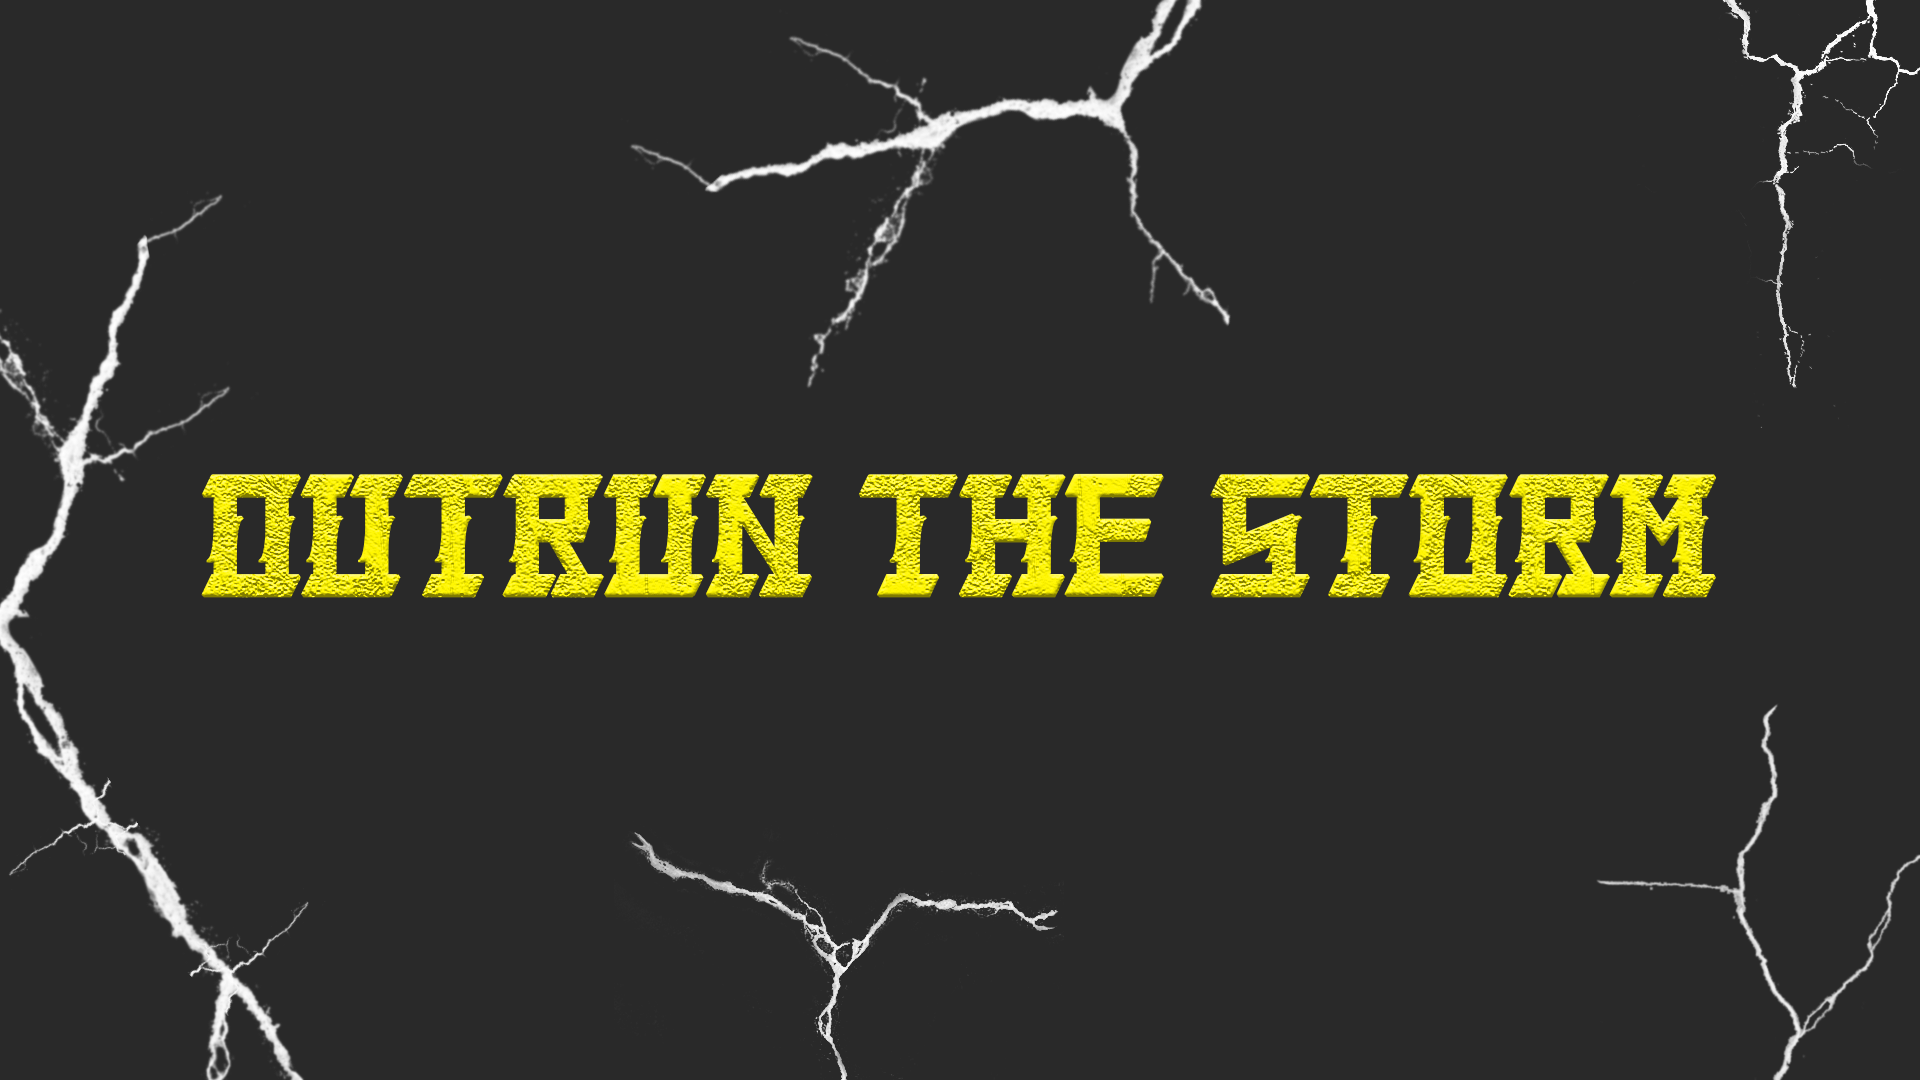 Outrun the storm